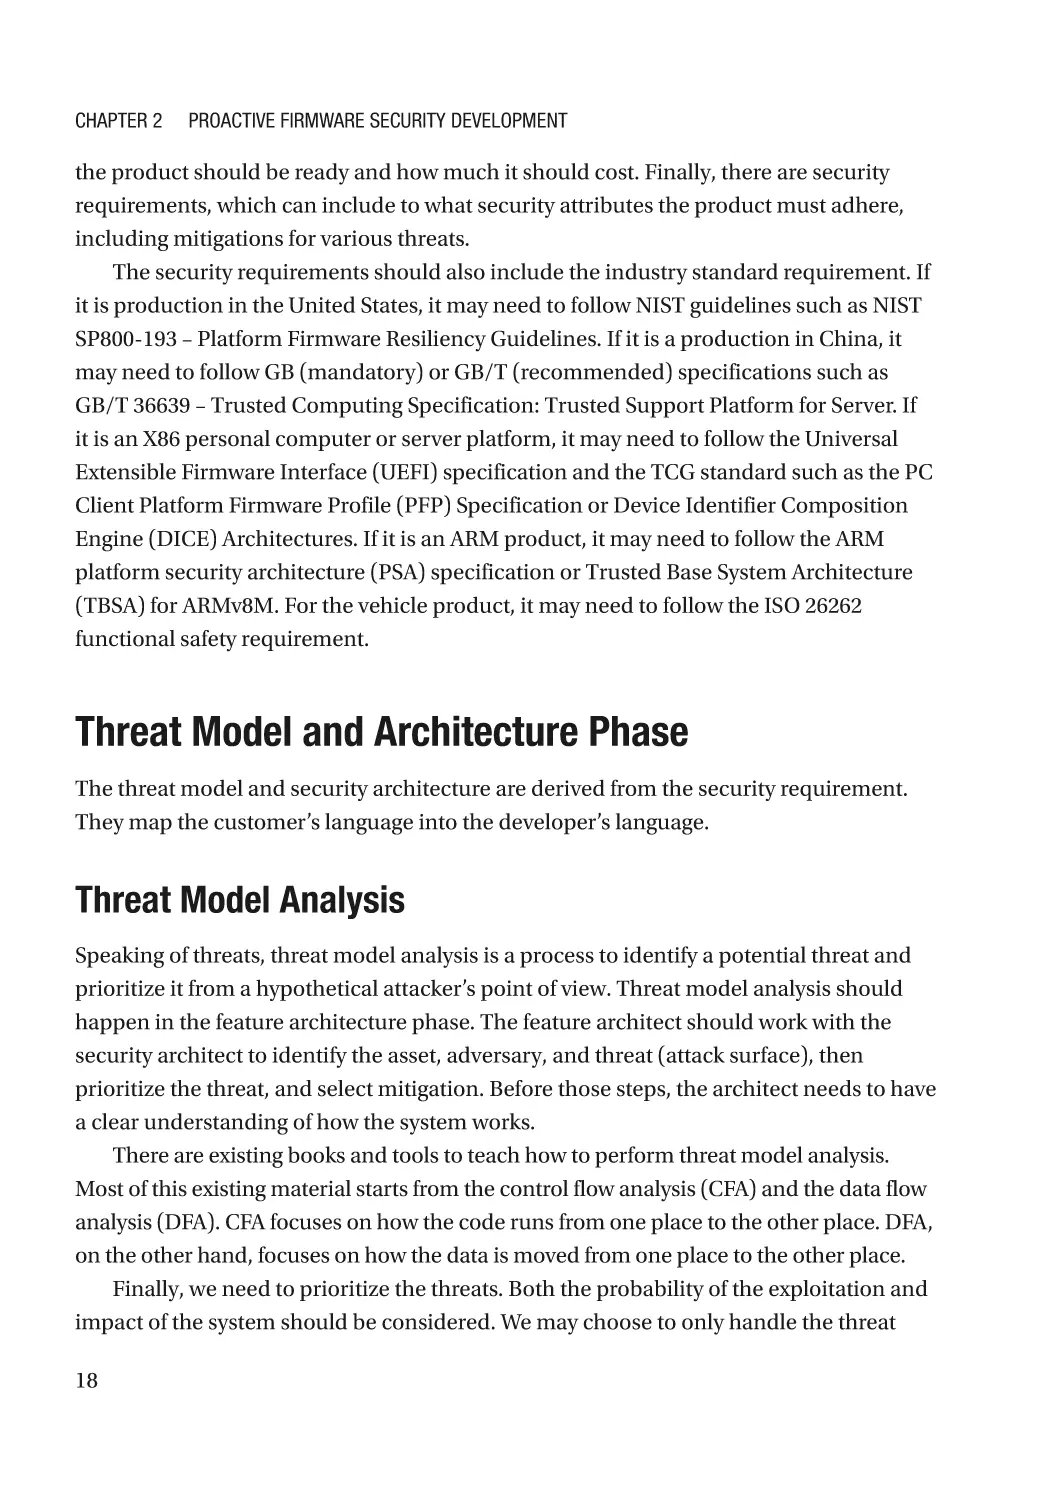 Threat Model and Architecture Phase
Threat Model Analysis